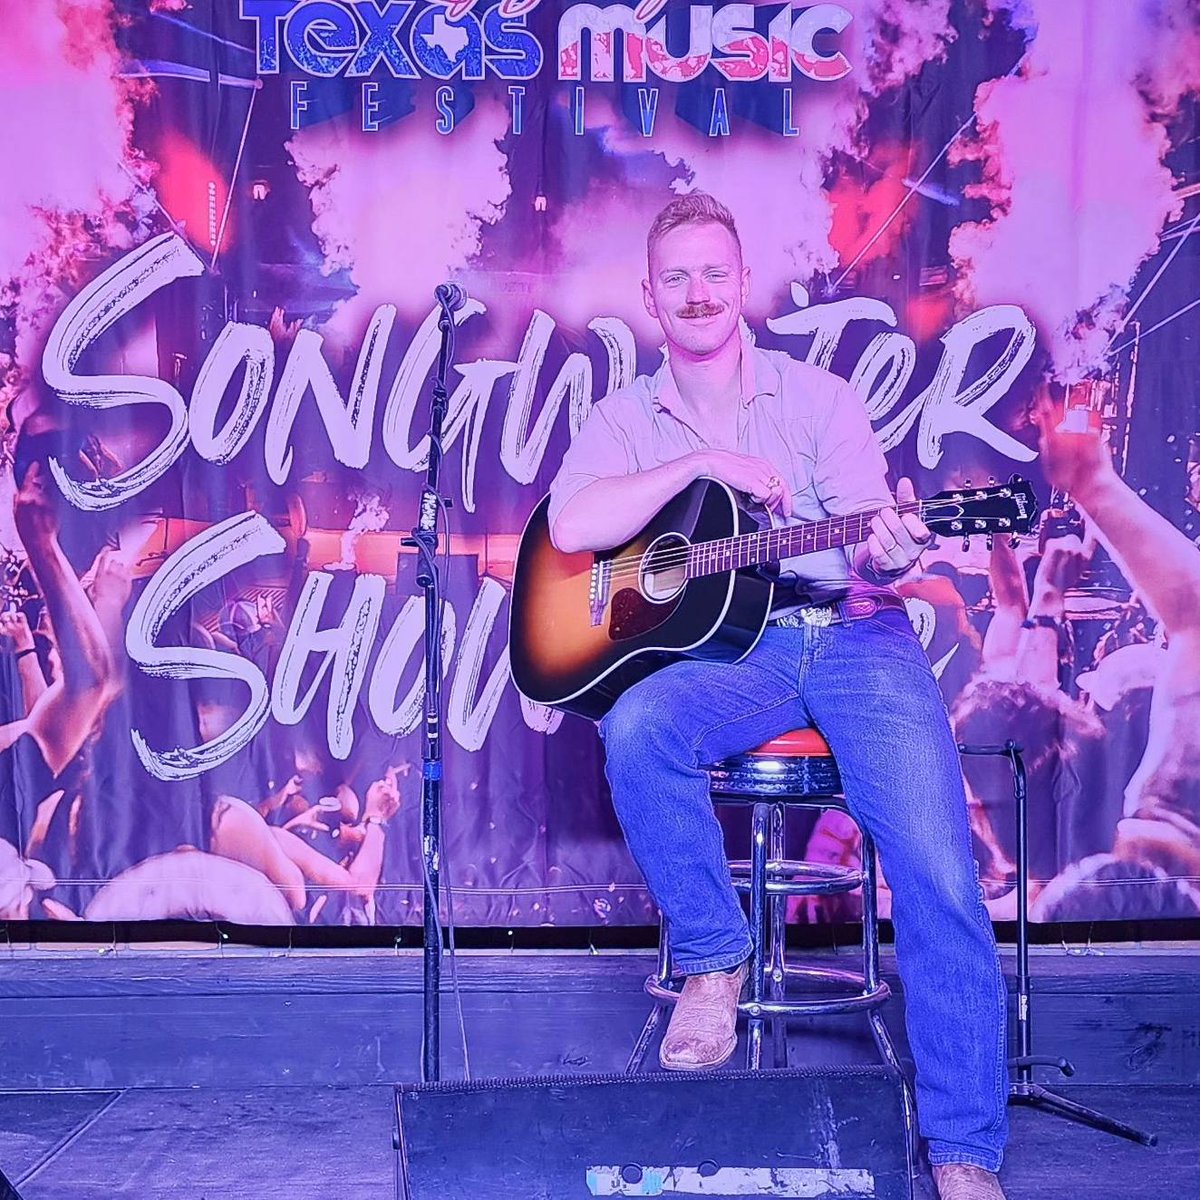 Please join me today on 95.9 The Ranch during the 4 PM hour as I introduce you to the music of Caleb Sam Brown Music, the winner of the @texasmusicfest Songwriter Showcase. Caleb is an unbelievable talent that needs to be shared. Please don't miss this.